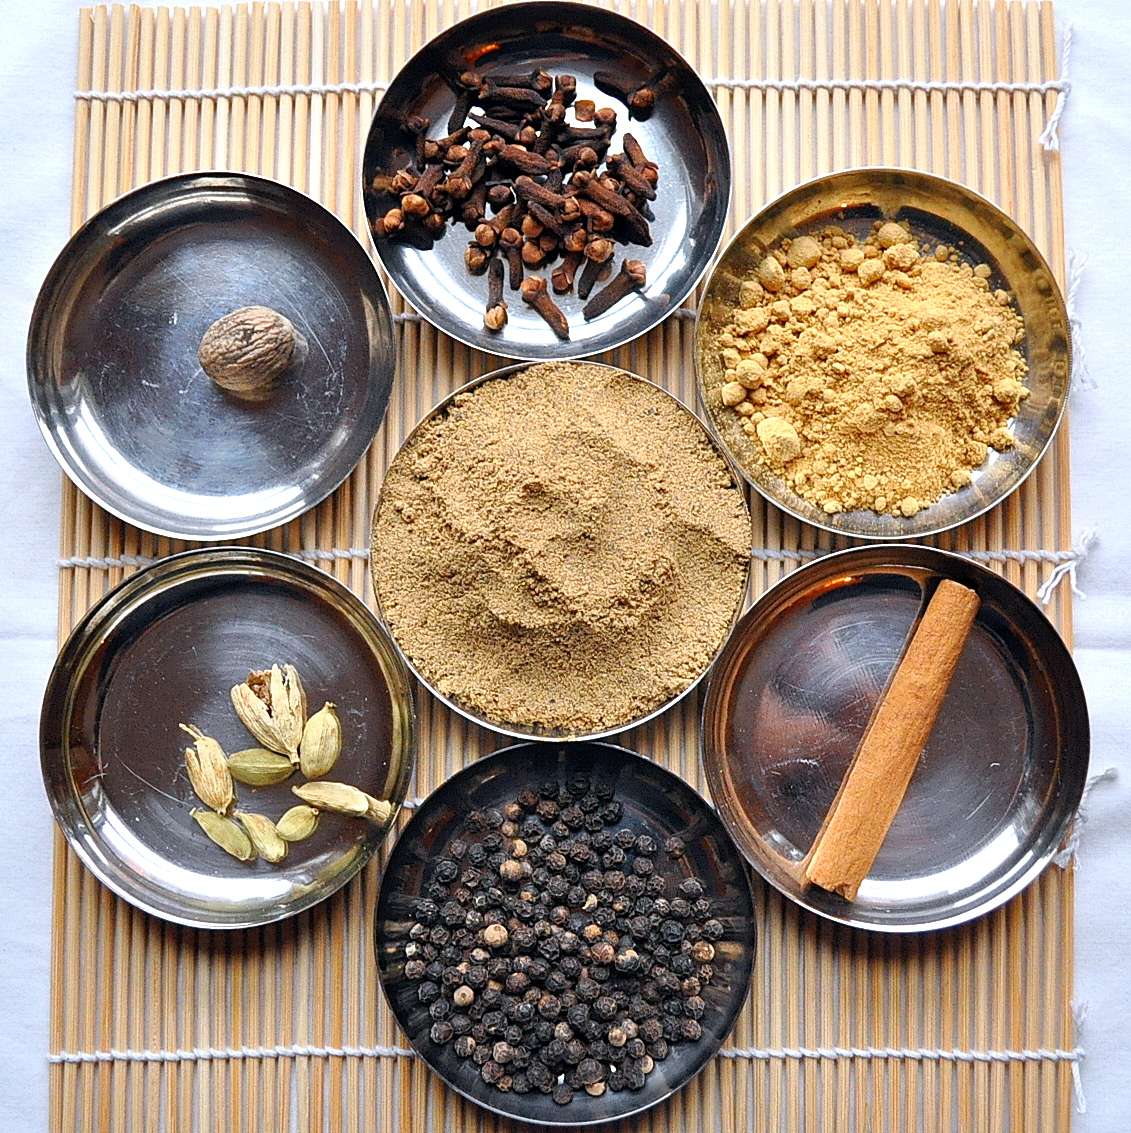 How to Make [the best] Chai [ever]